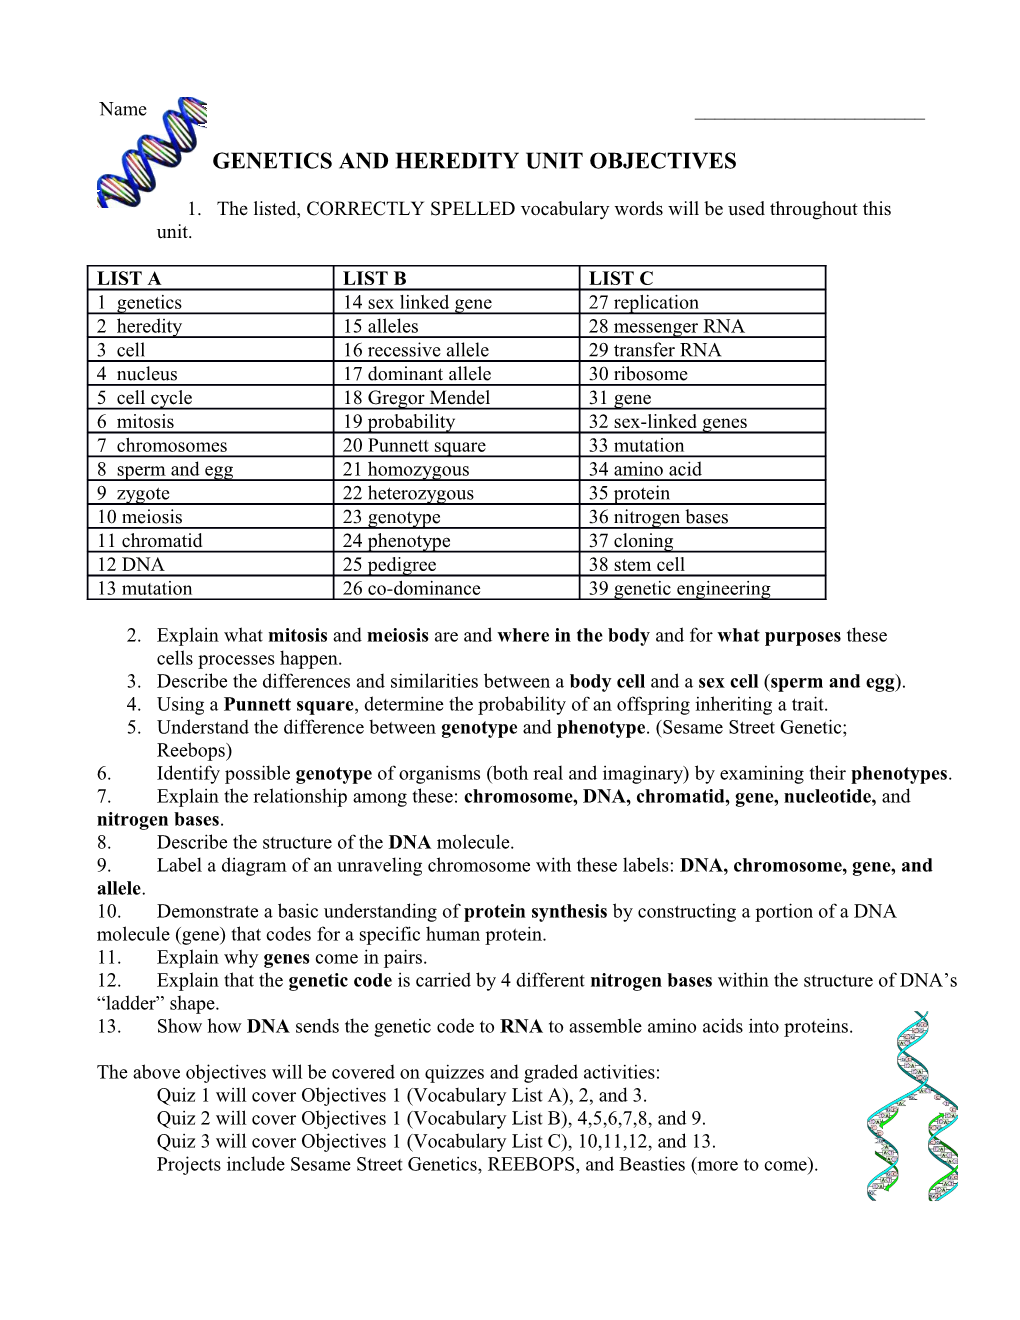 Genetics and Heredity Unit Objectives